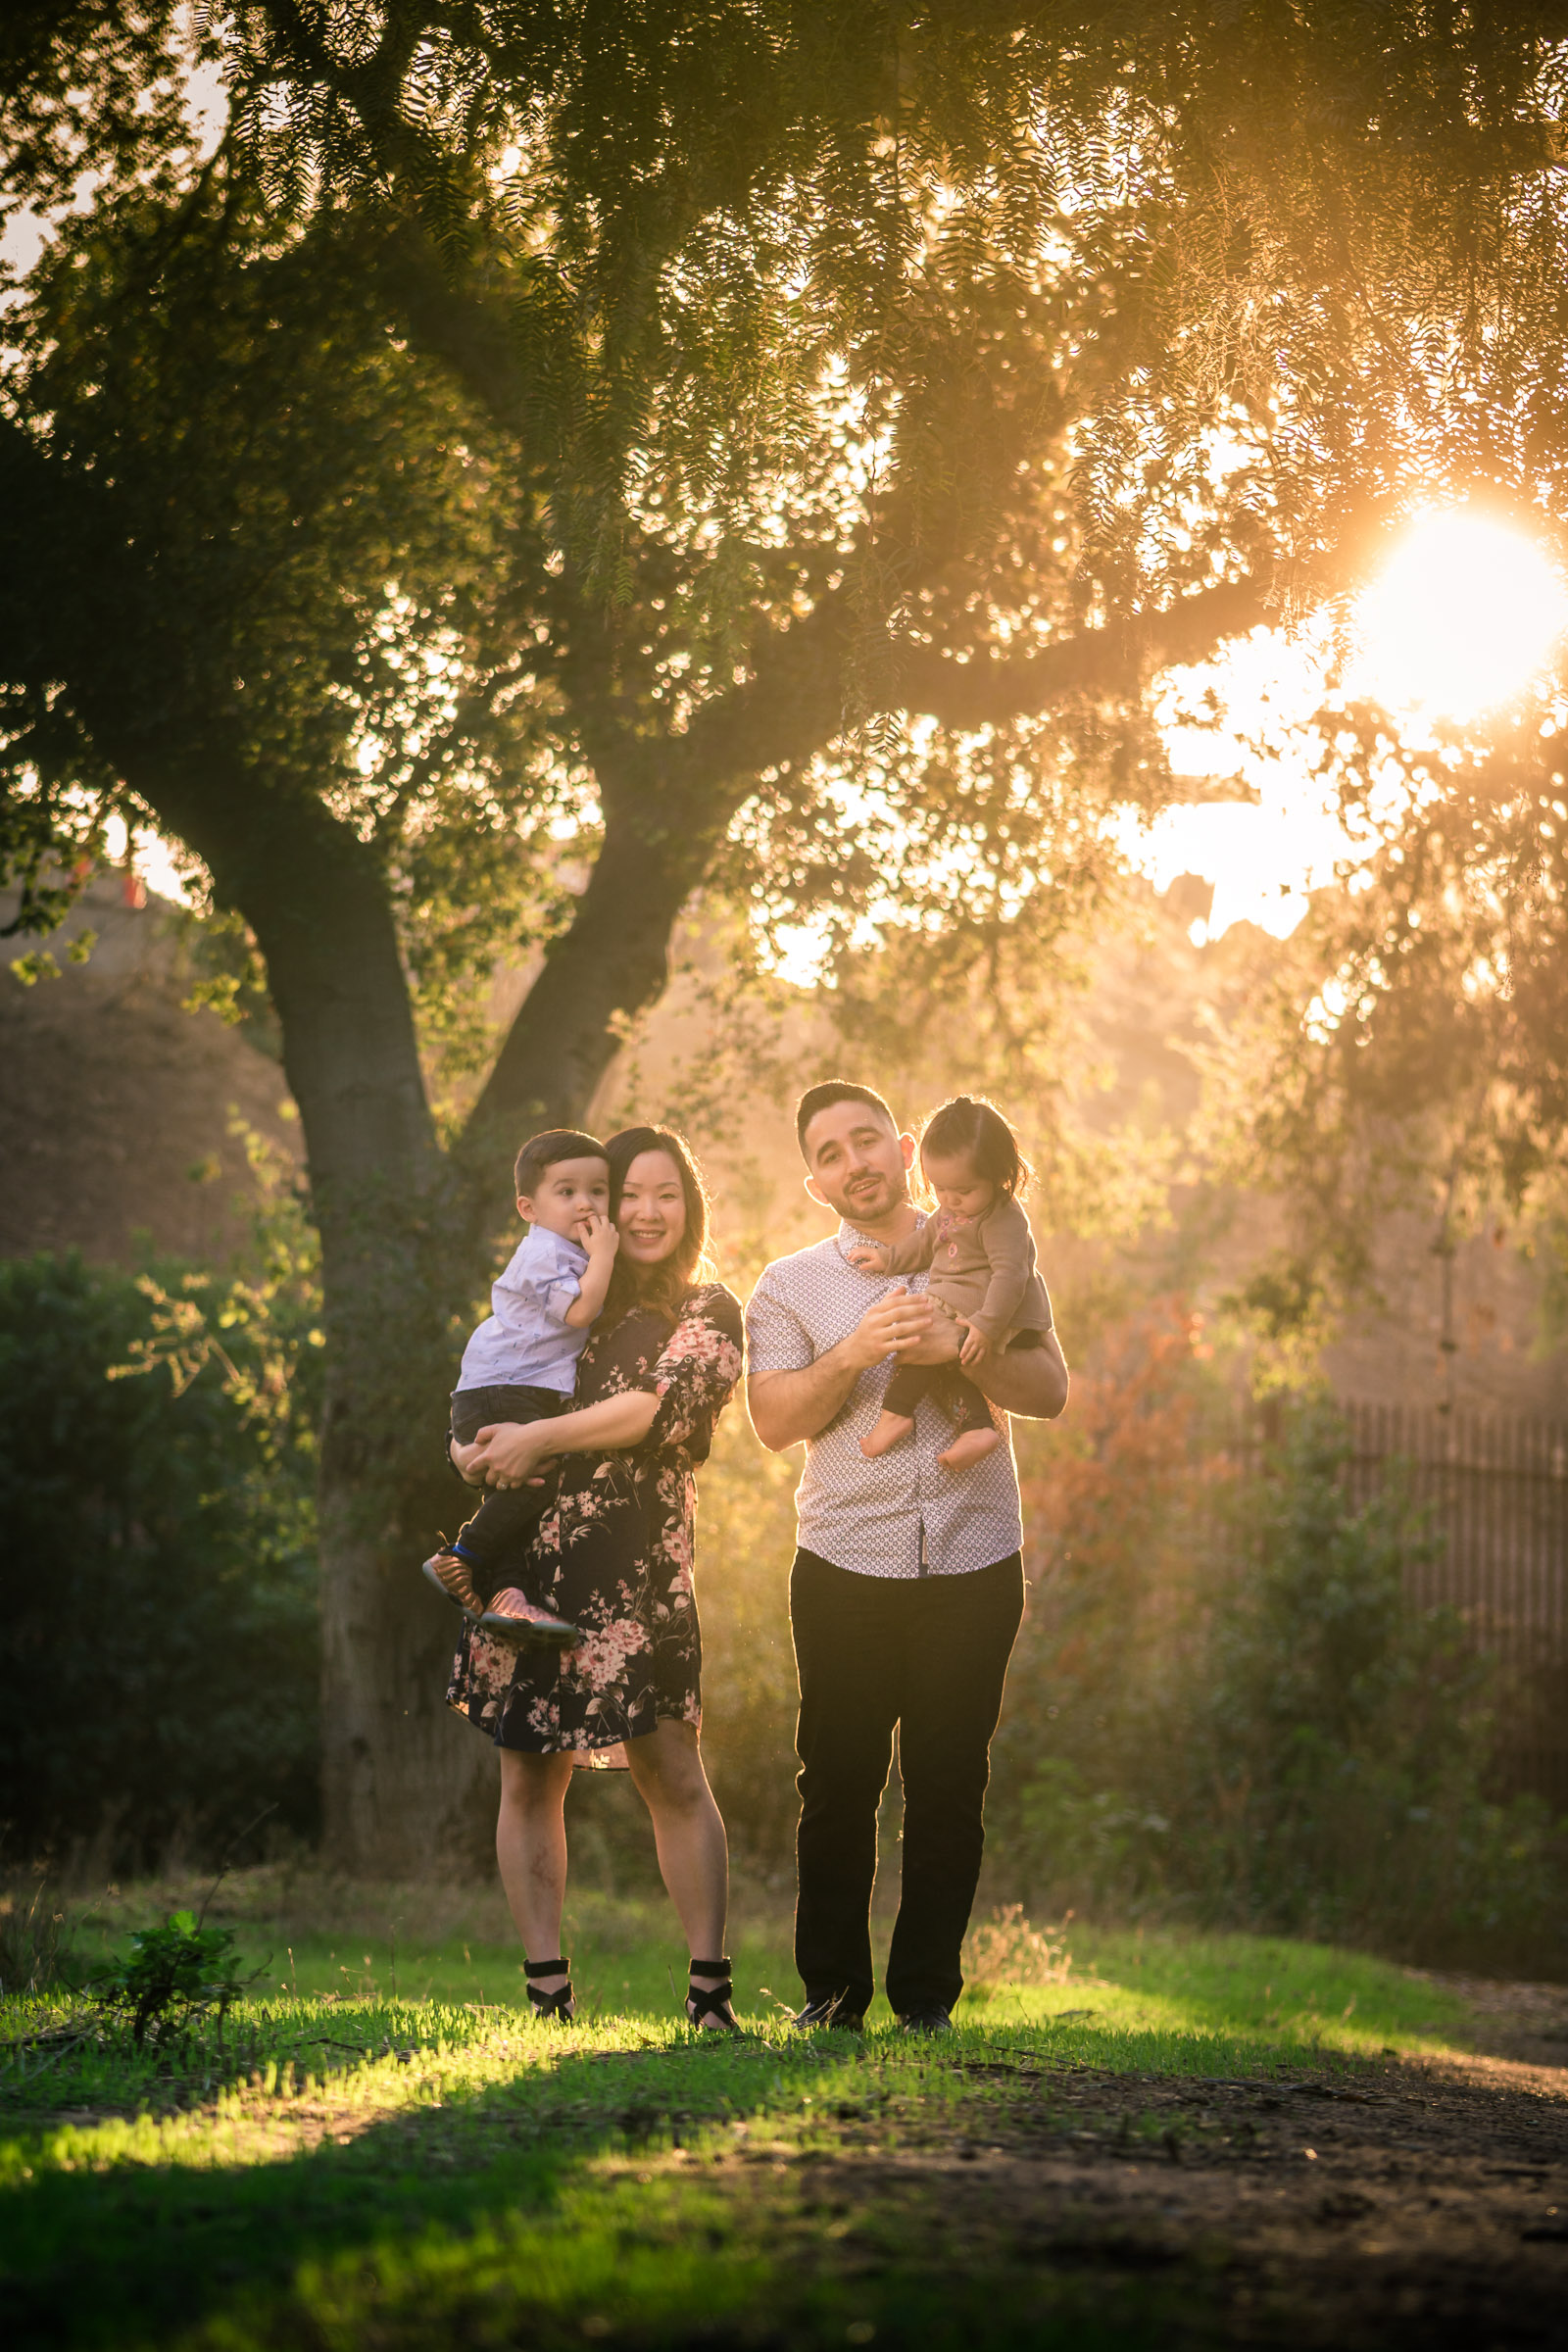 Candid family portrait of a family walking on the one Juanita Cooke trail in Fullerton during golden hour Taken by Joseph Barber photography